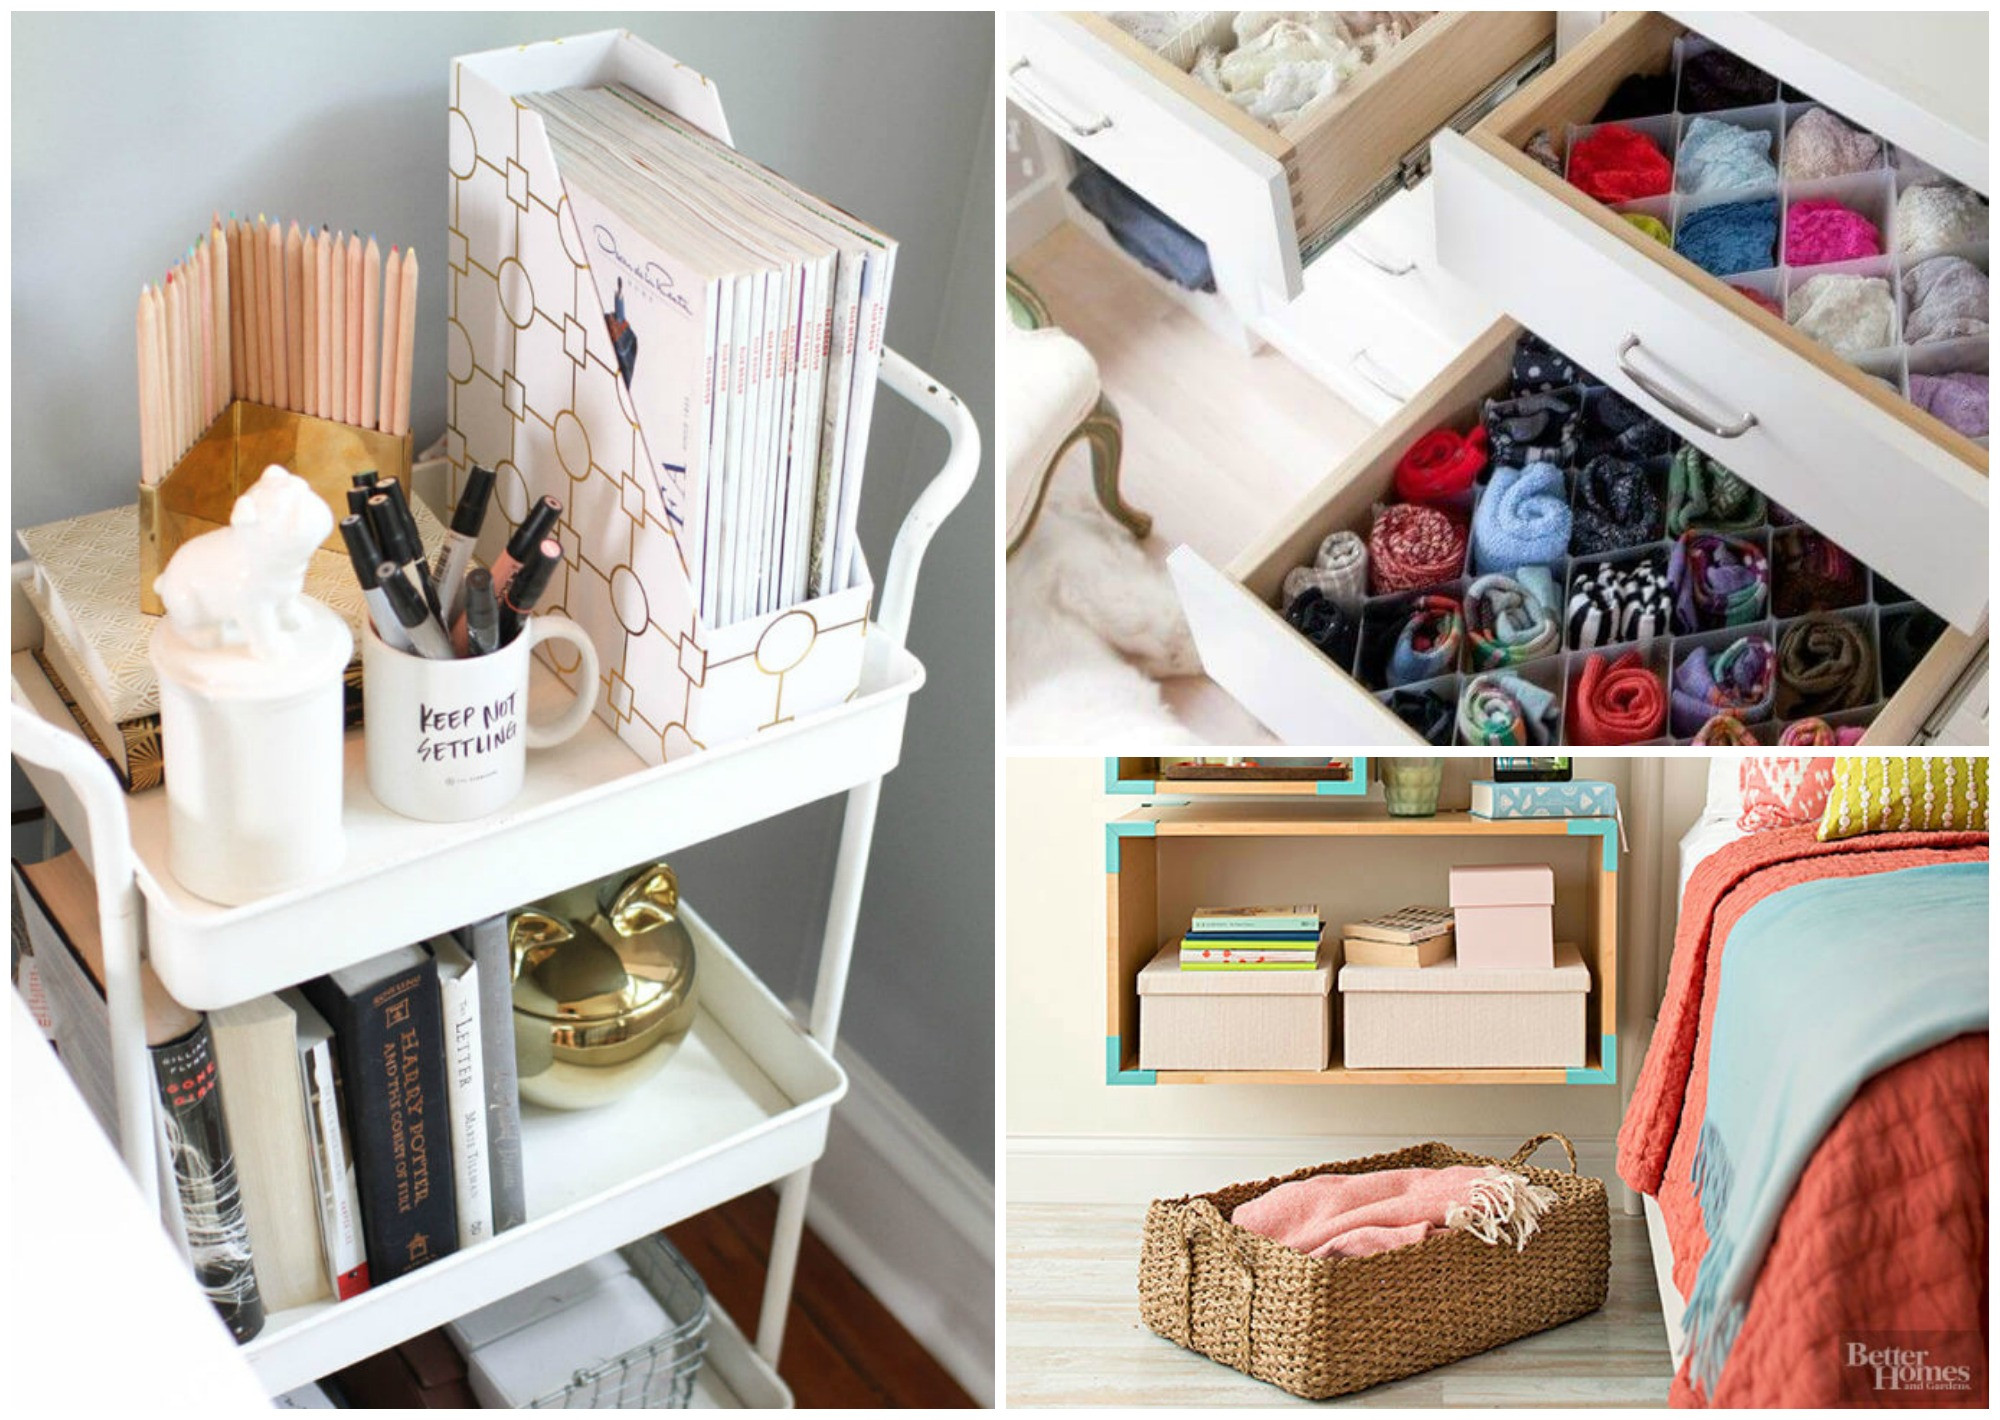 Bedroom Organization Tips
 9 Super Efficient Ways to Organize Your Small Bedroom